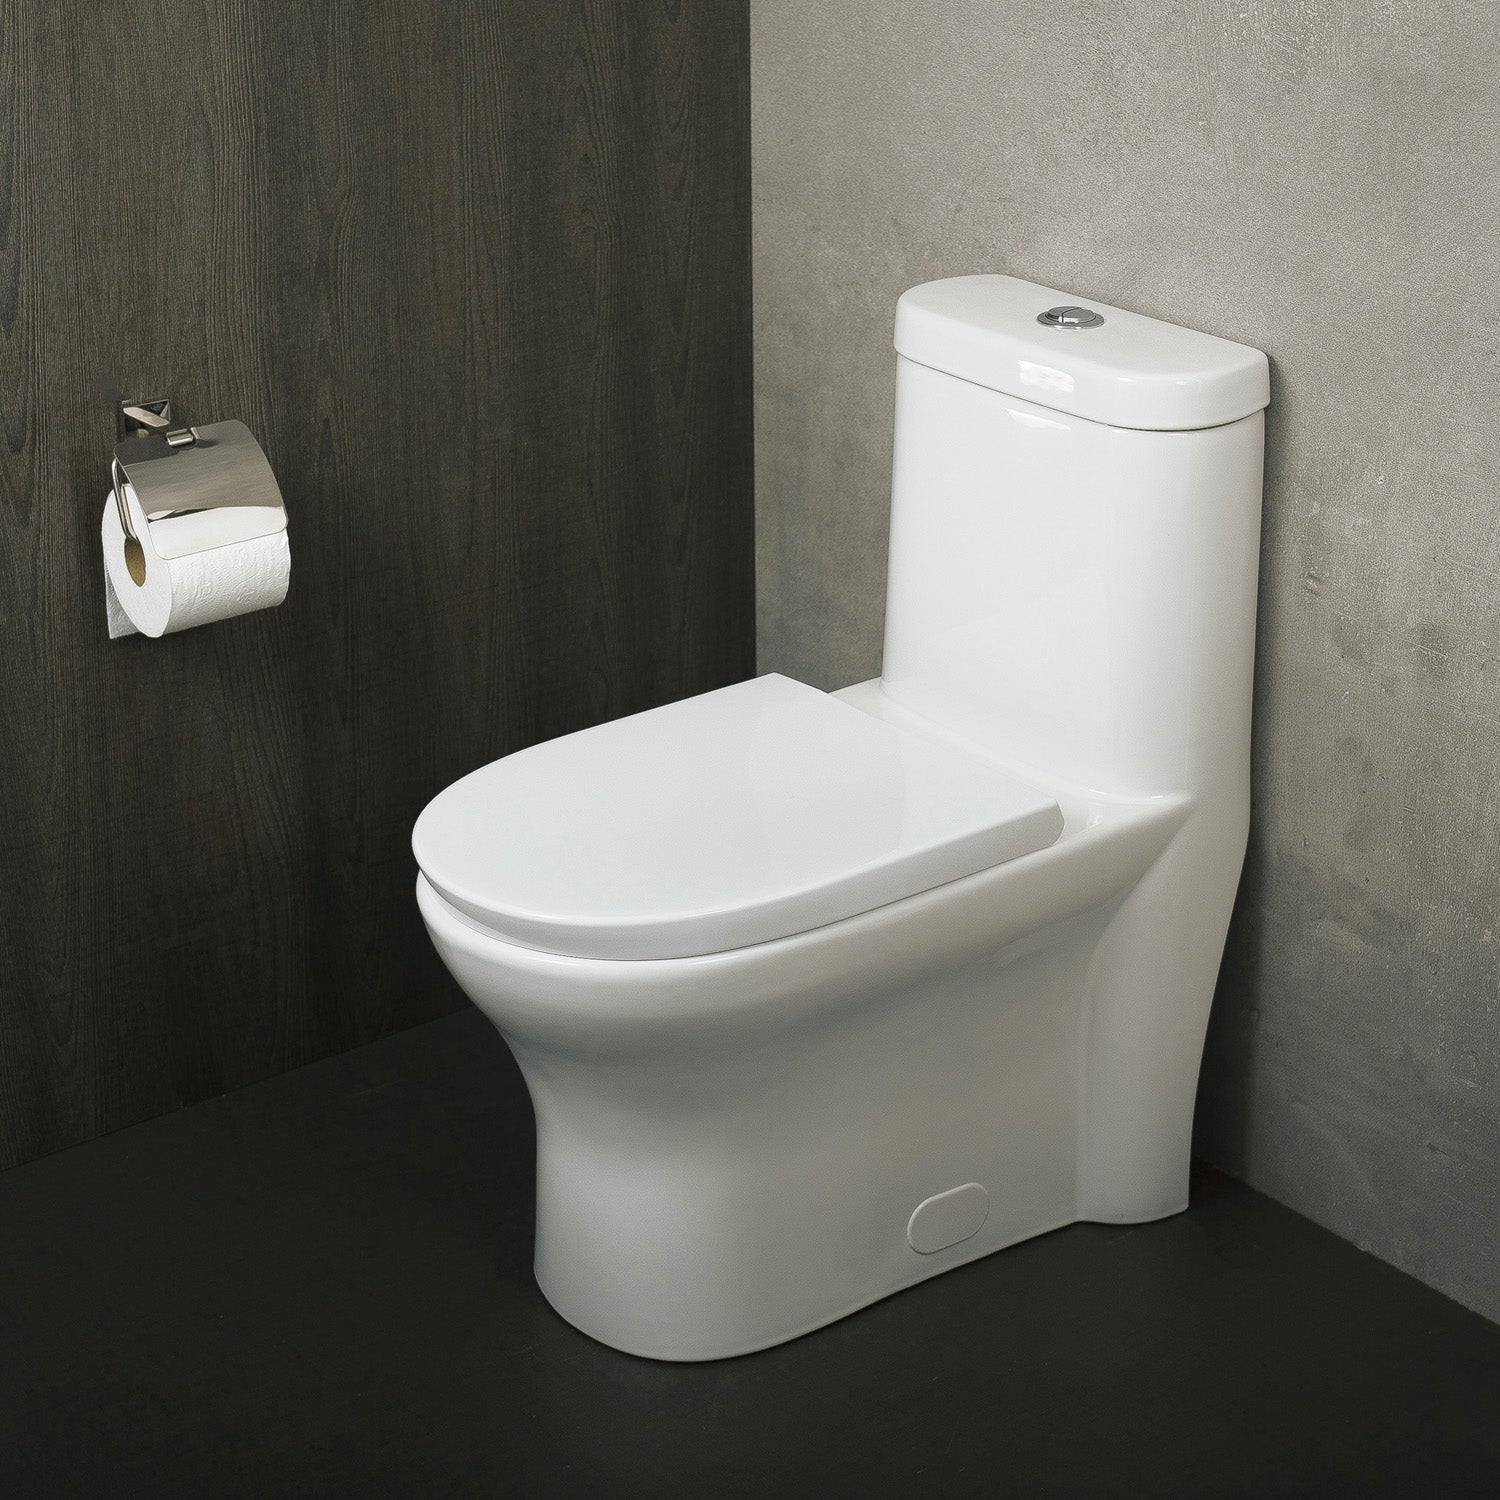 DAX One Piece Oval Toilet with Soft Closing Seat and Dual Flush High-Efficiency, Porcelain, White Finish, Height 29-1/2 Inches (BSN-832)